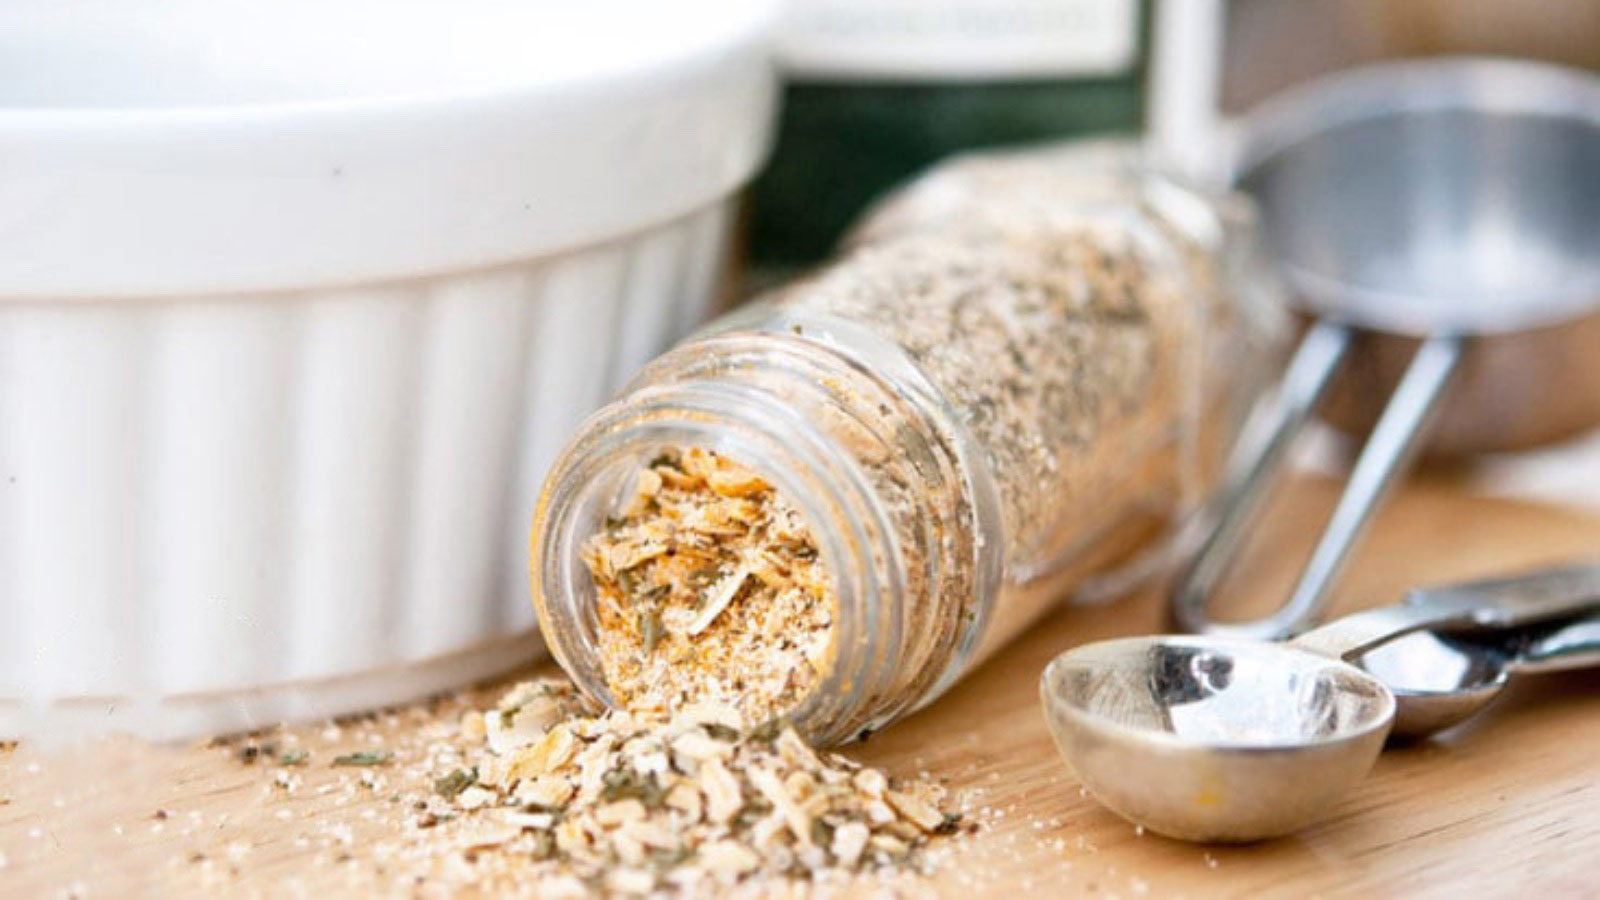 13 Homemade Seasoning Blends You Can Make in 5 Minutes